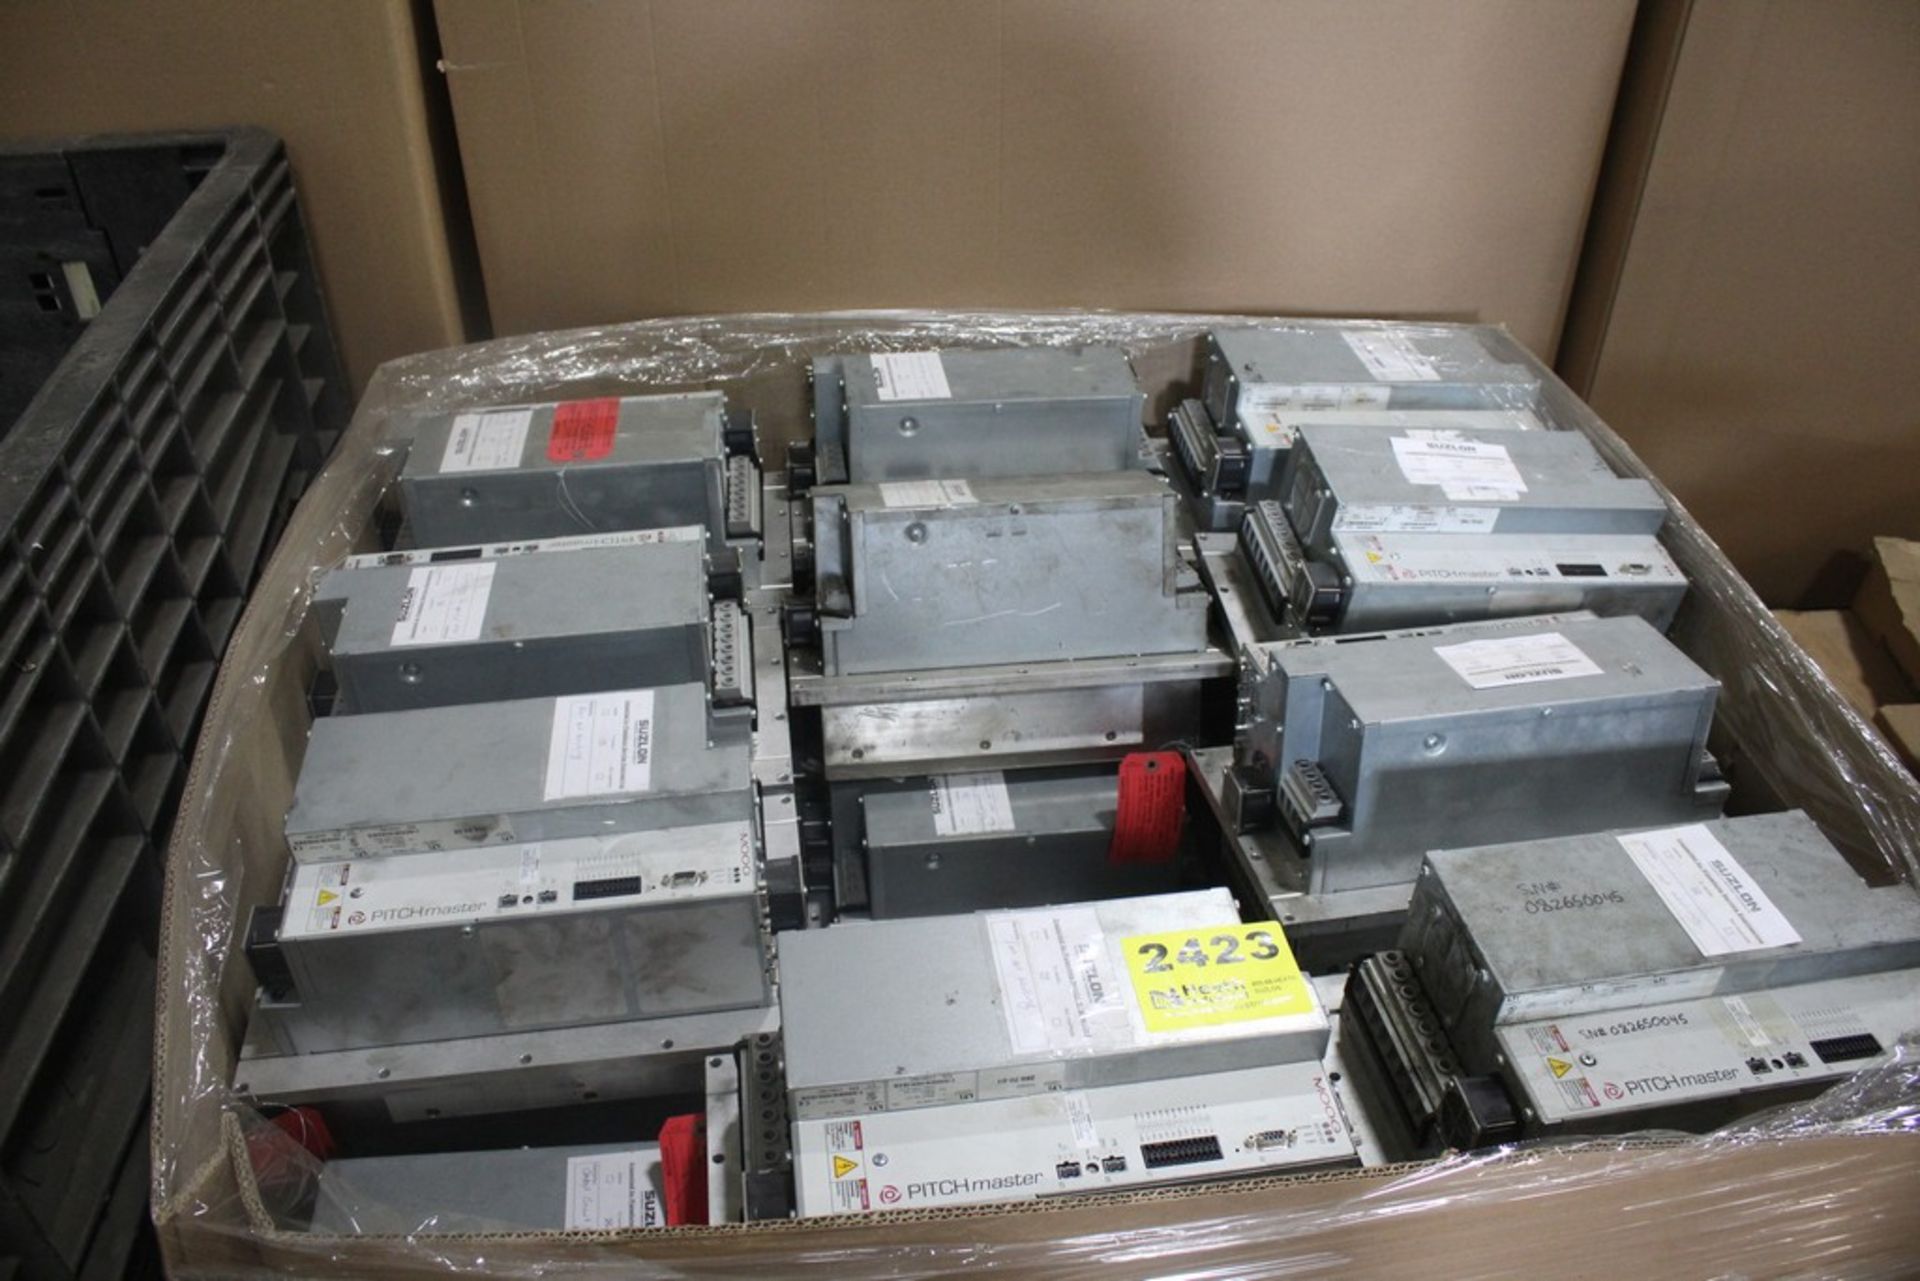 LARGE QUANTITY OF PITCHMASTER CONTROL BOXES IN CRATE - Image 2 of 2